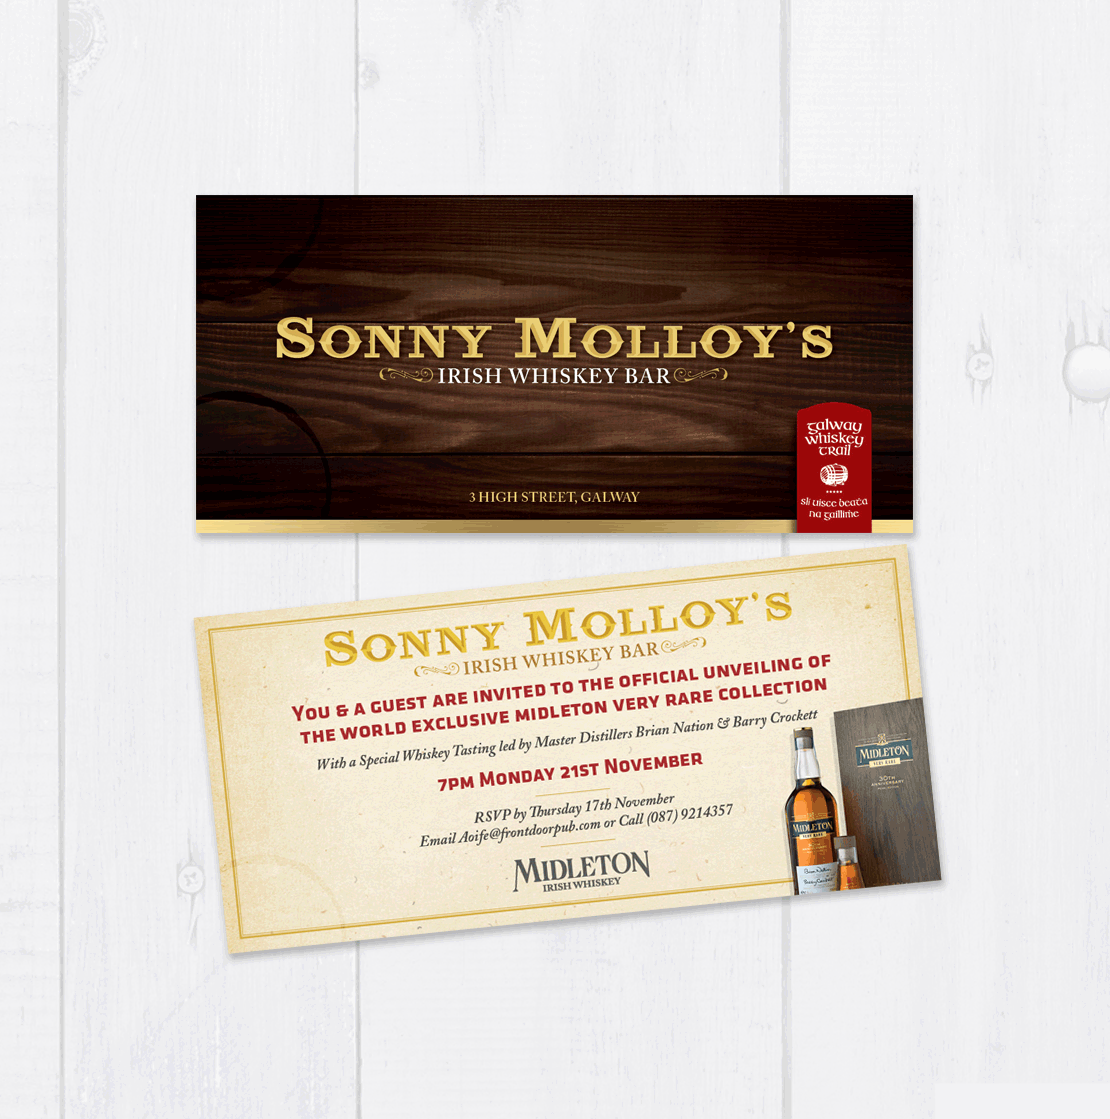 Sonny Molloy’s Whiskey Bar special event invites